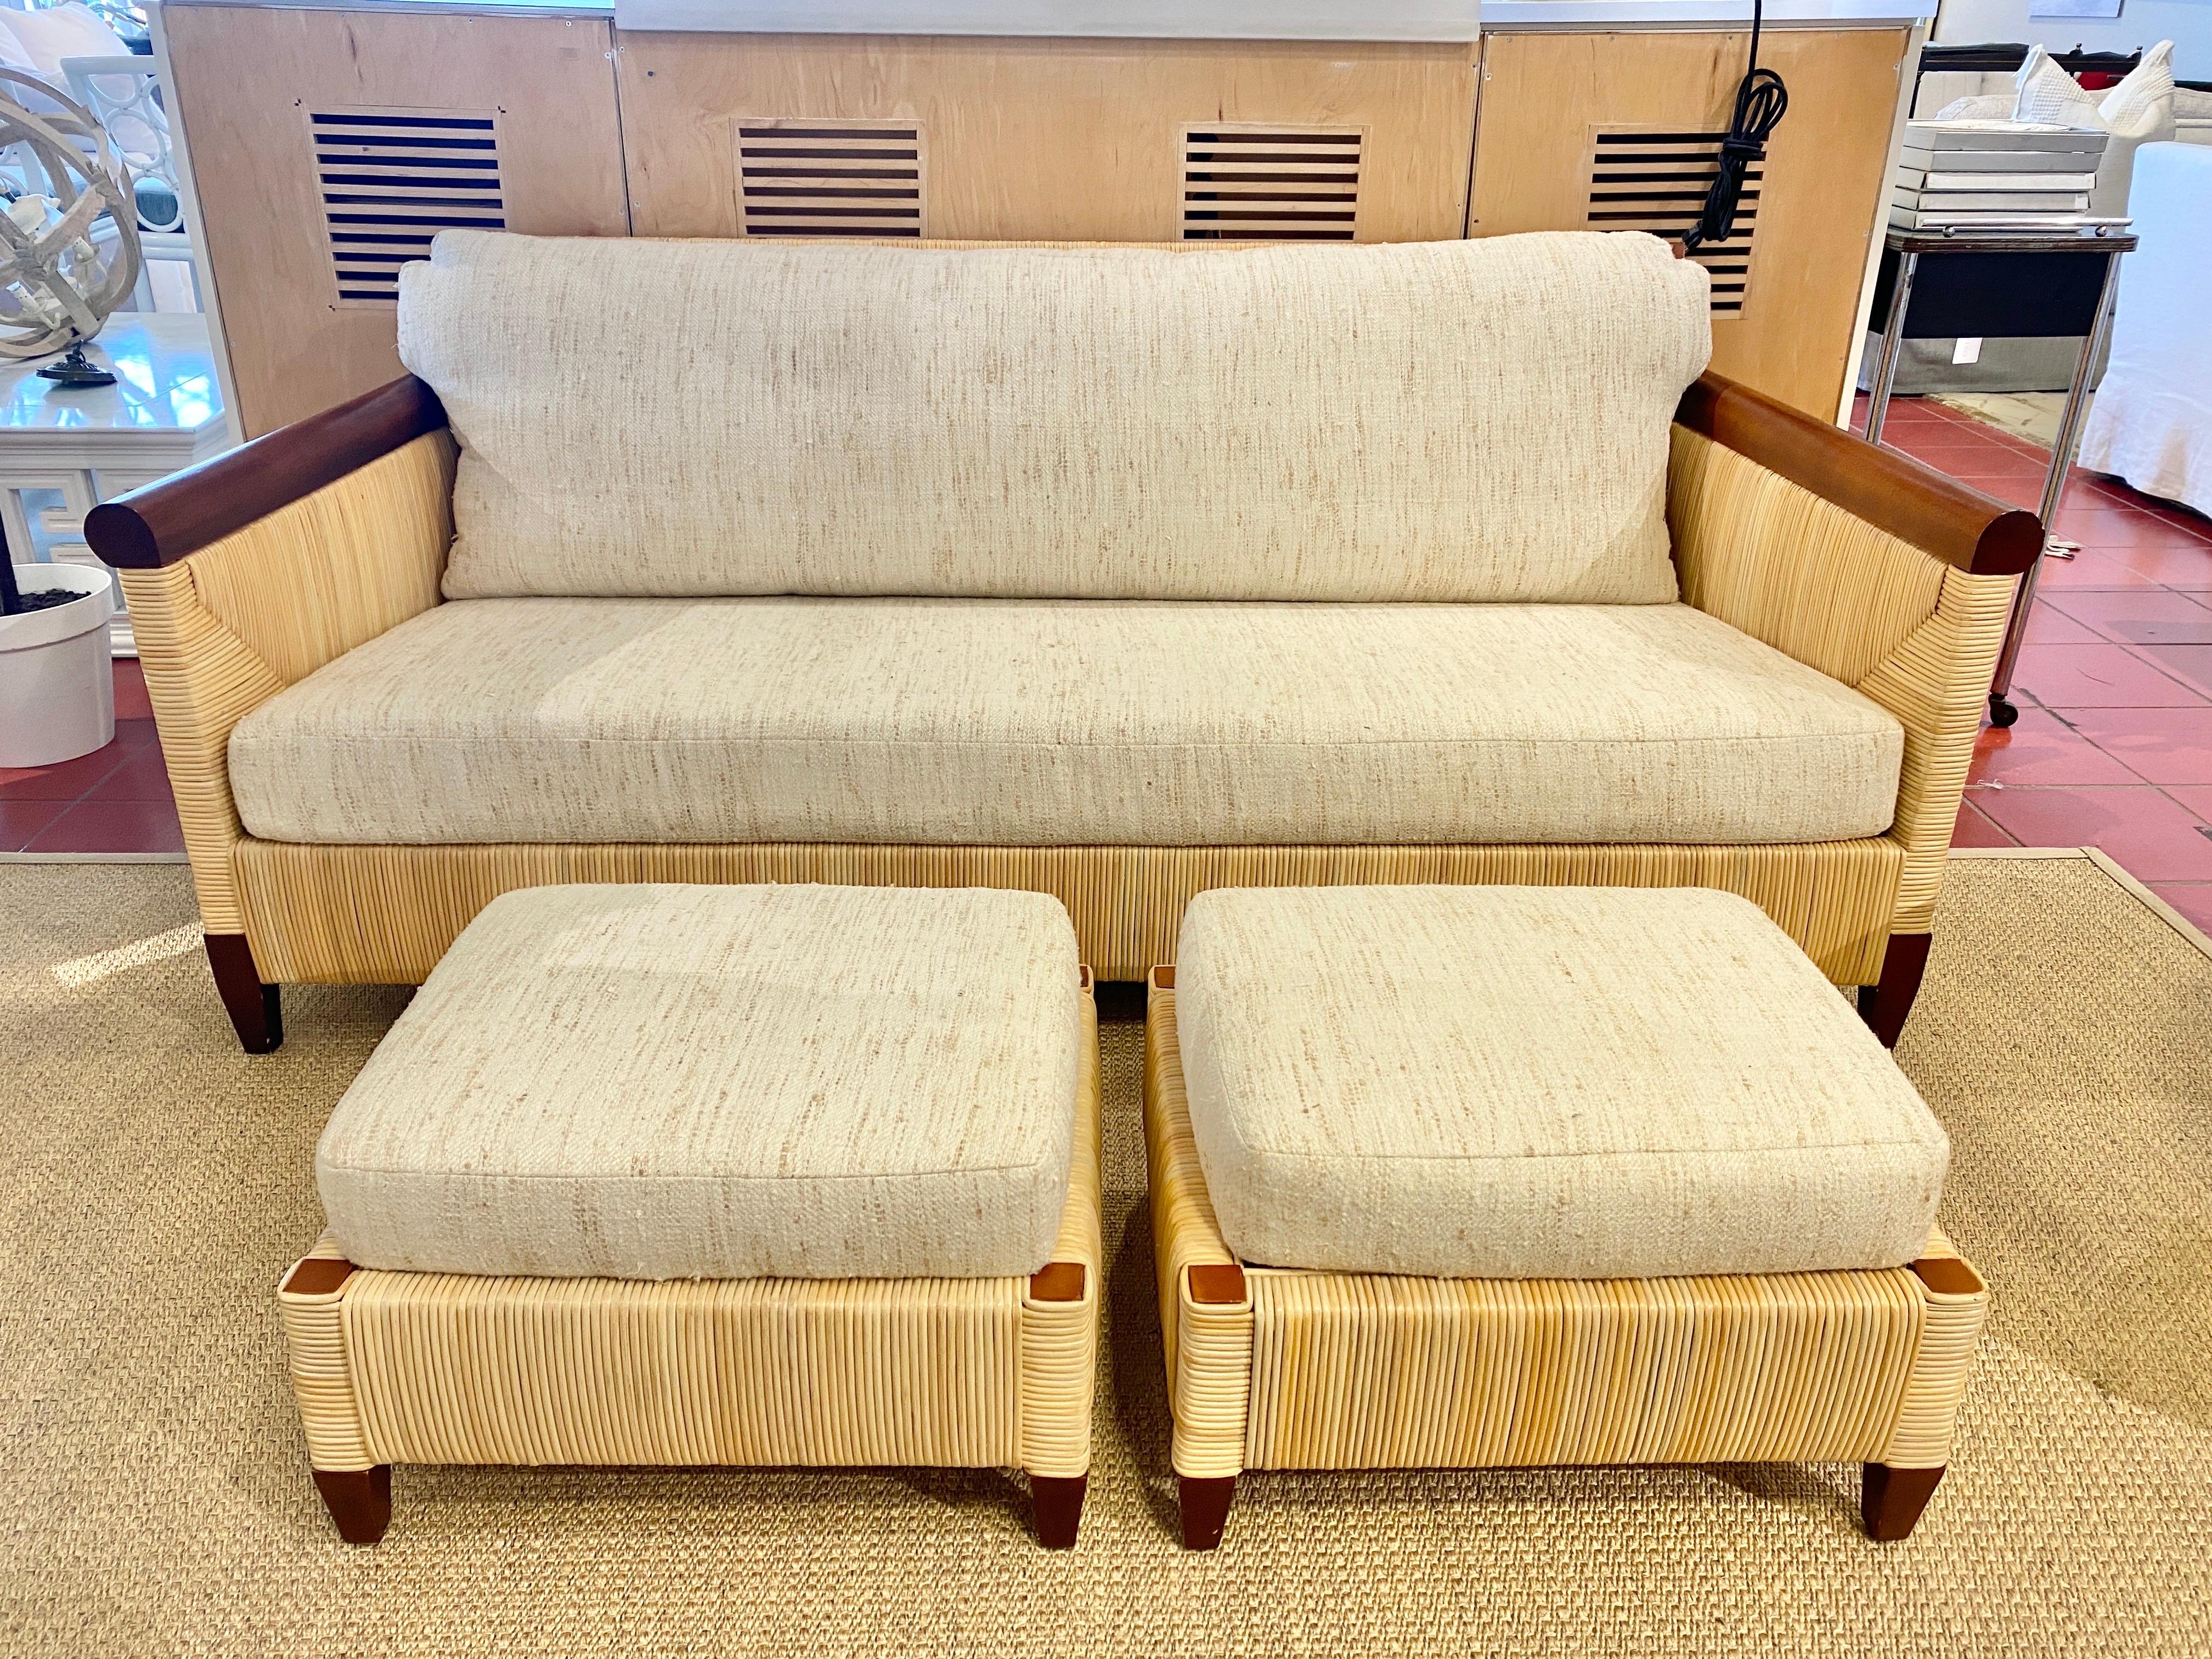 Superb Mahogany and wicker sofa with 2 matching ottomans by Donghia

Measures: Sofa 73